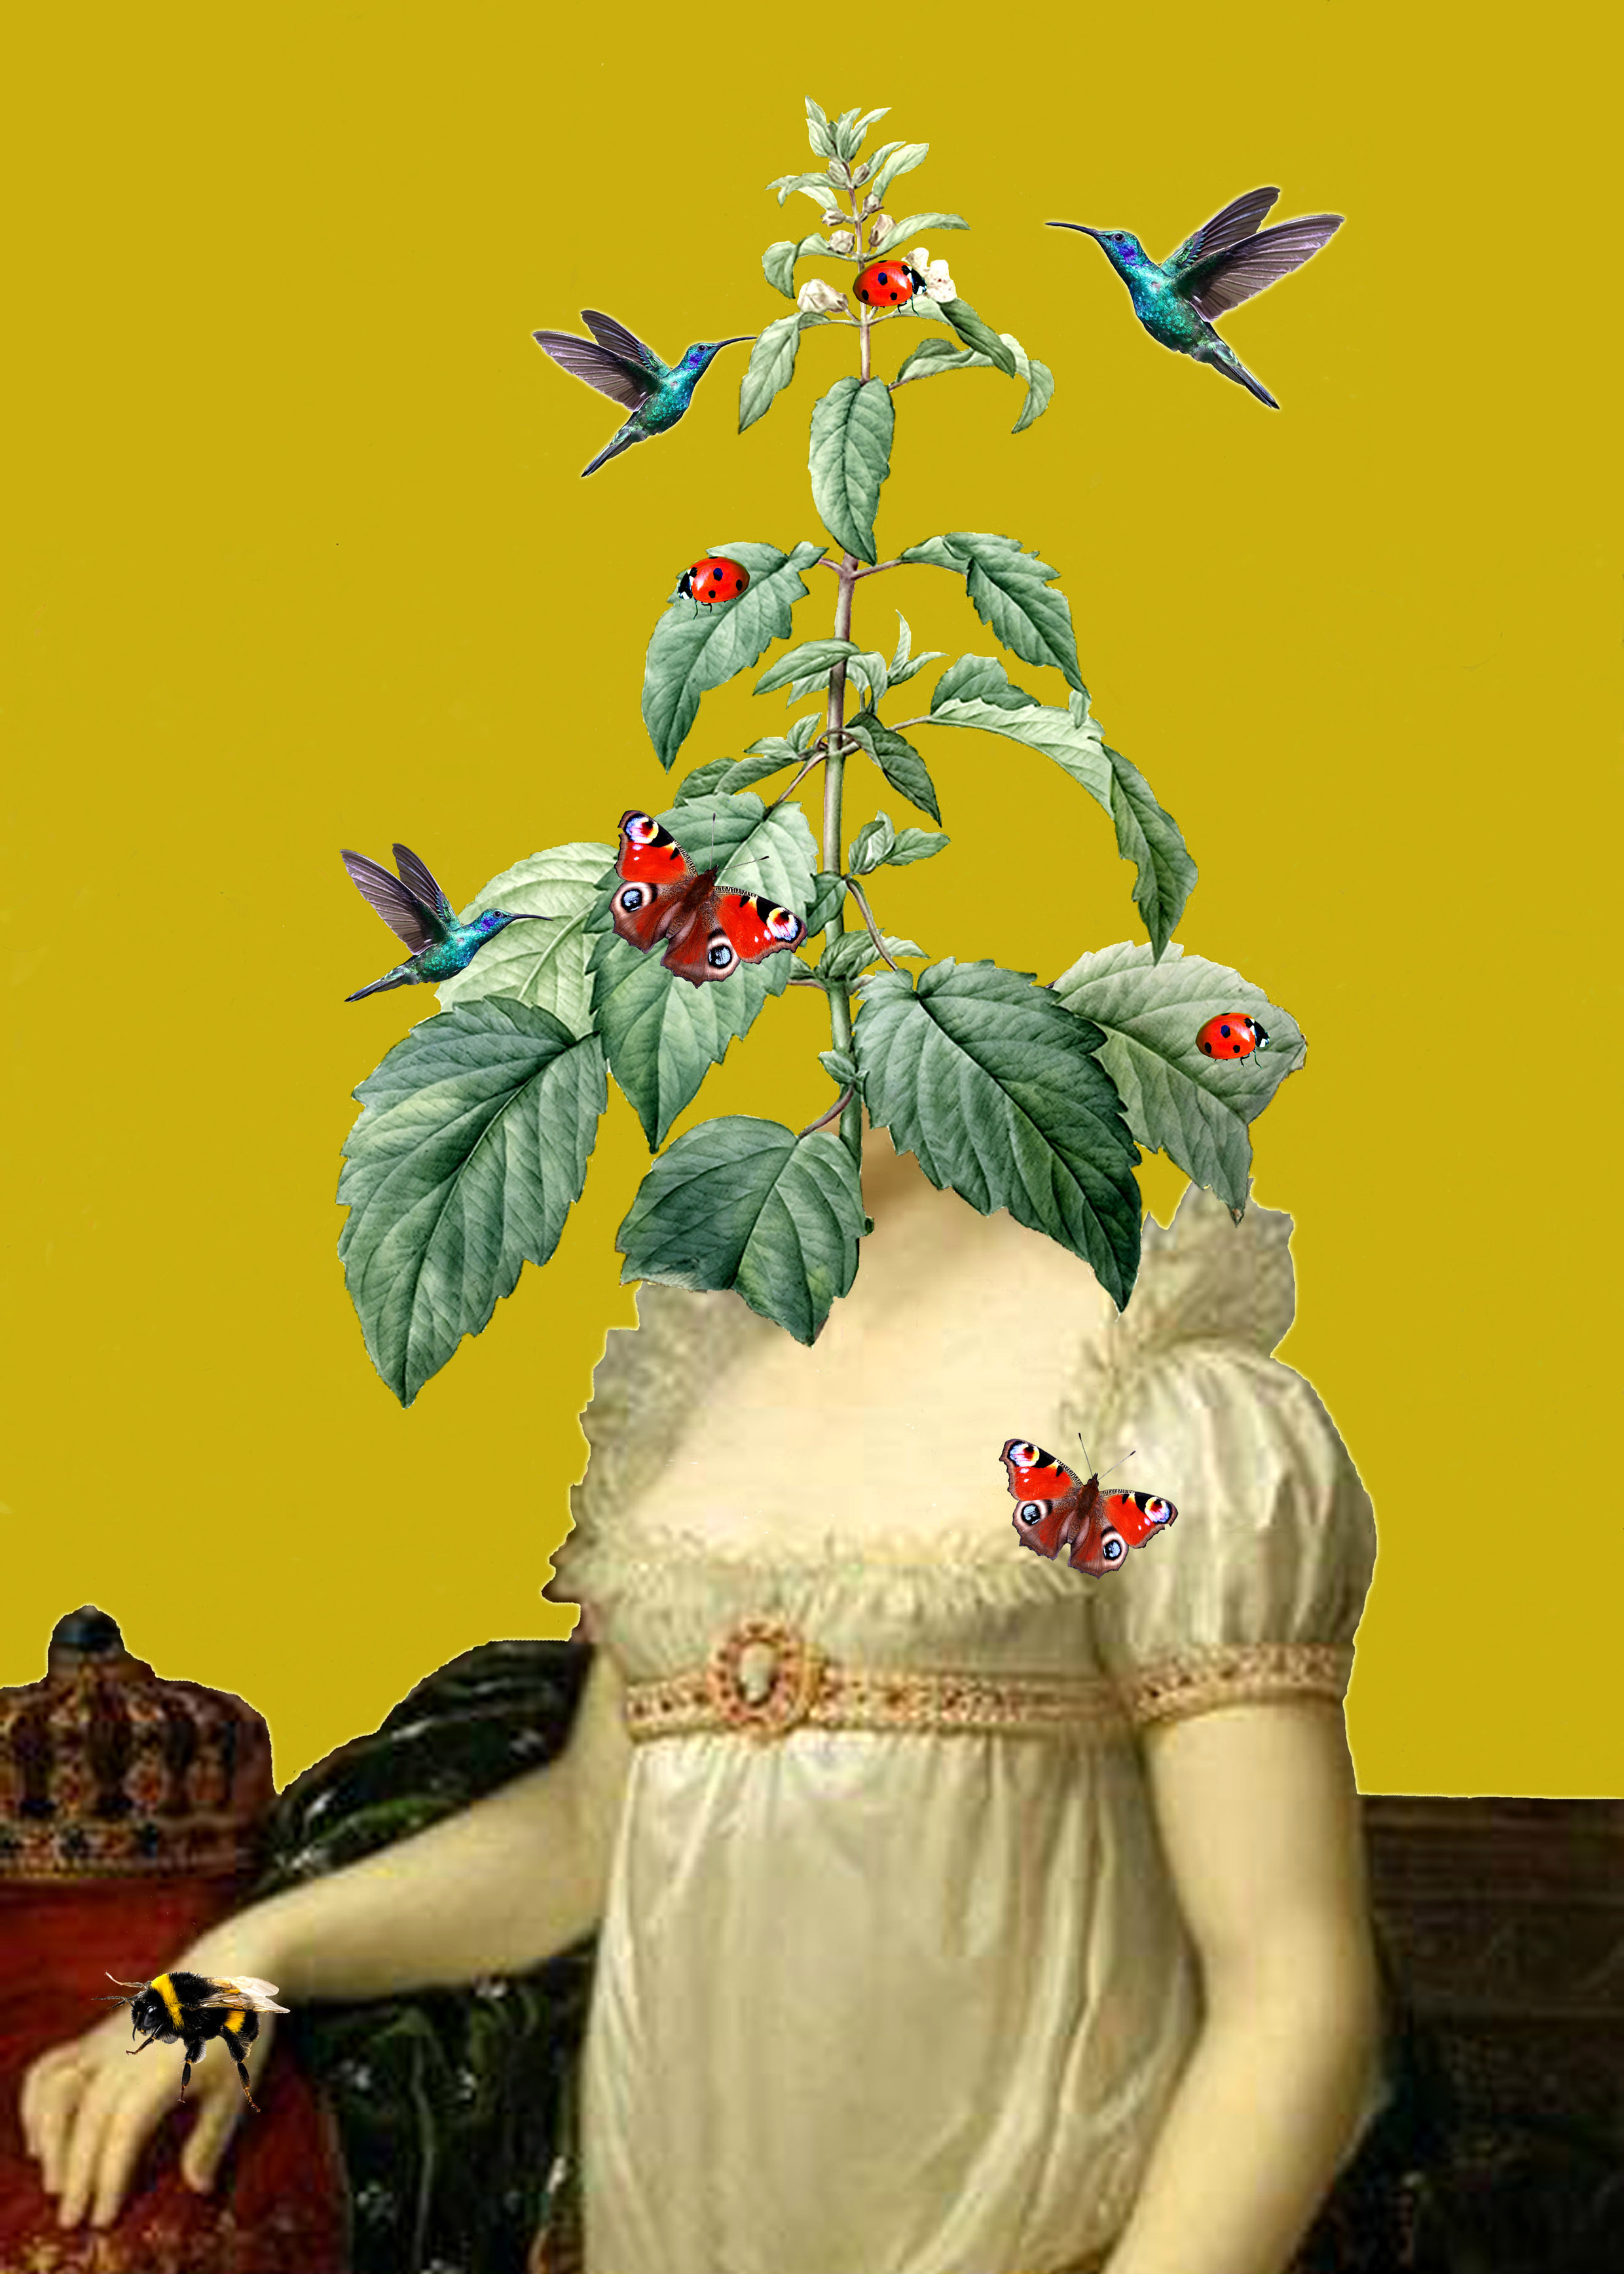 This collage shows the arms and torso of the Empress Josephine spliced together with the josephine imperatricis plant, positione where her head would be. Hummingbirds, ladybirds and butterflies flutter around the plant. Josephine faces the sitter, with her right arm slightly raised in front of a golden crown. Her white silk dress has a high empire-line waist and ruffles around the square neckline. The plant has a pyramidal shape with large, serrated leaves from a central stem, and is topped with a bloom of small white flowers. 